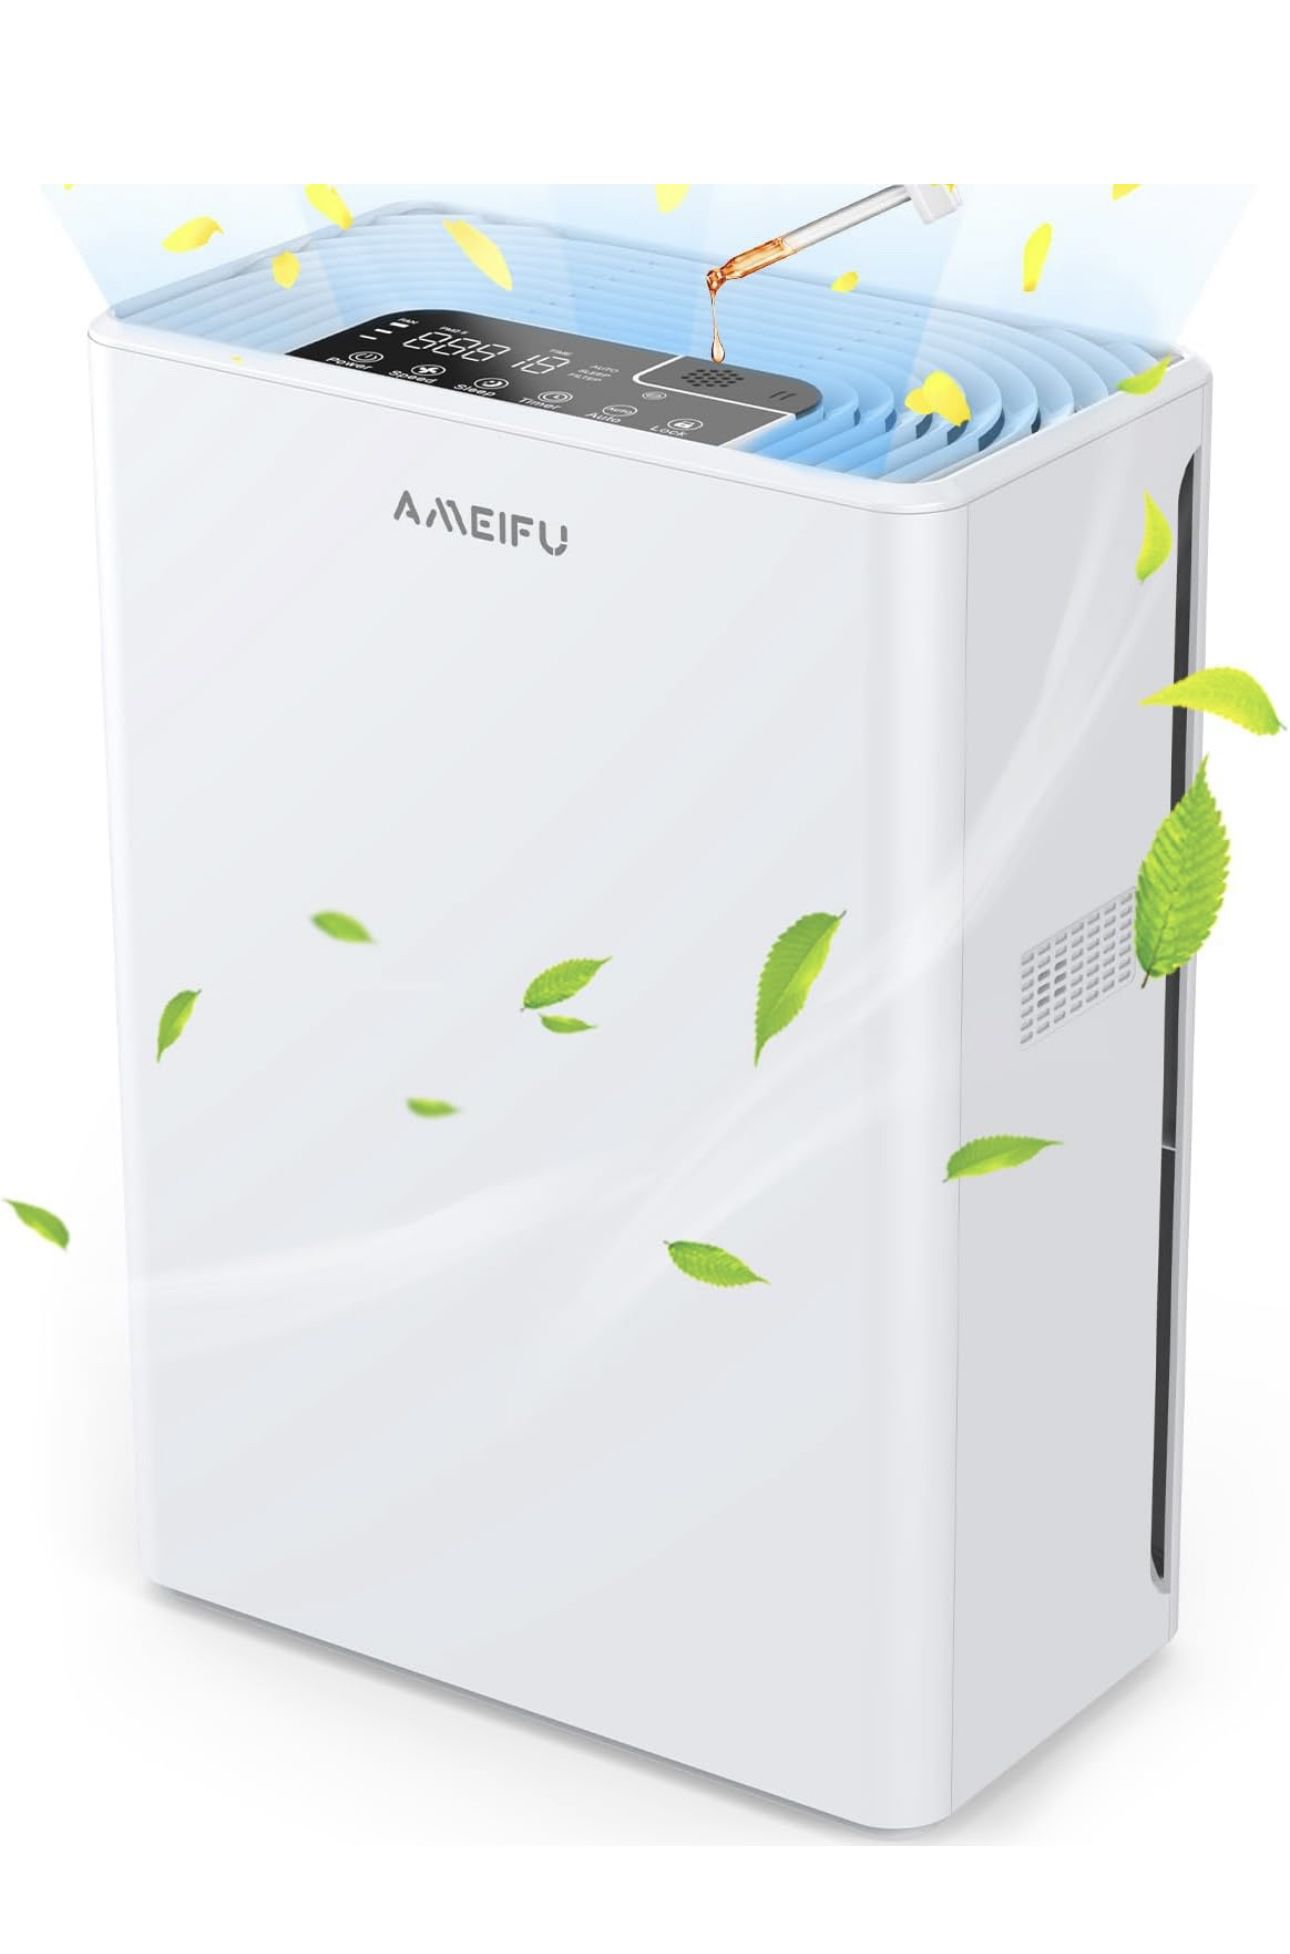 AMEIFU Air Purifiers for Home Large Room up to 1740sq.ft, H13 True Hepa Air Purifiers for Pets Hair, Dander, Smoke, Pollen, 3 Fan Speeds, 5 Timer Air 